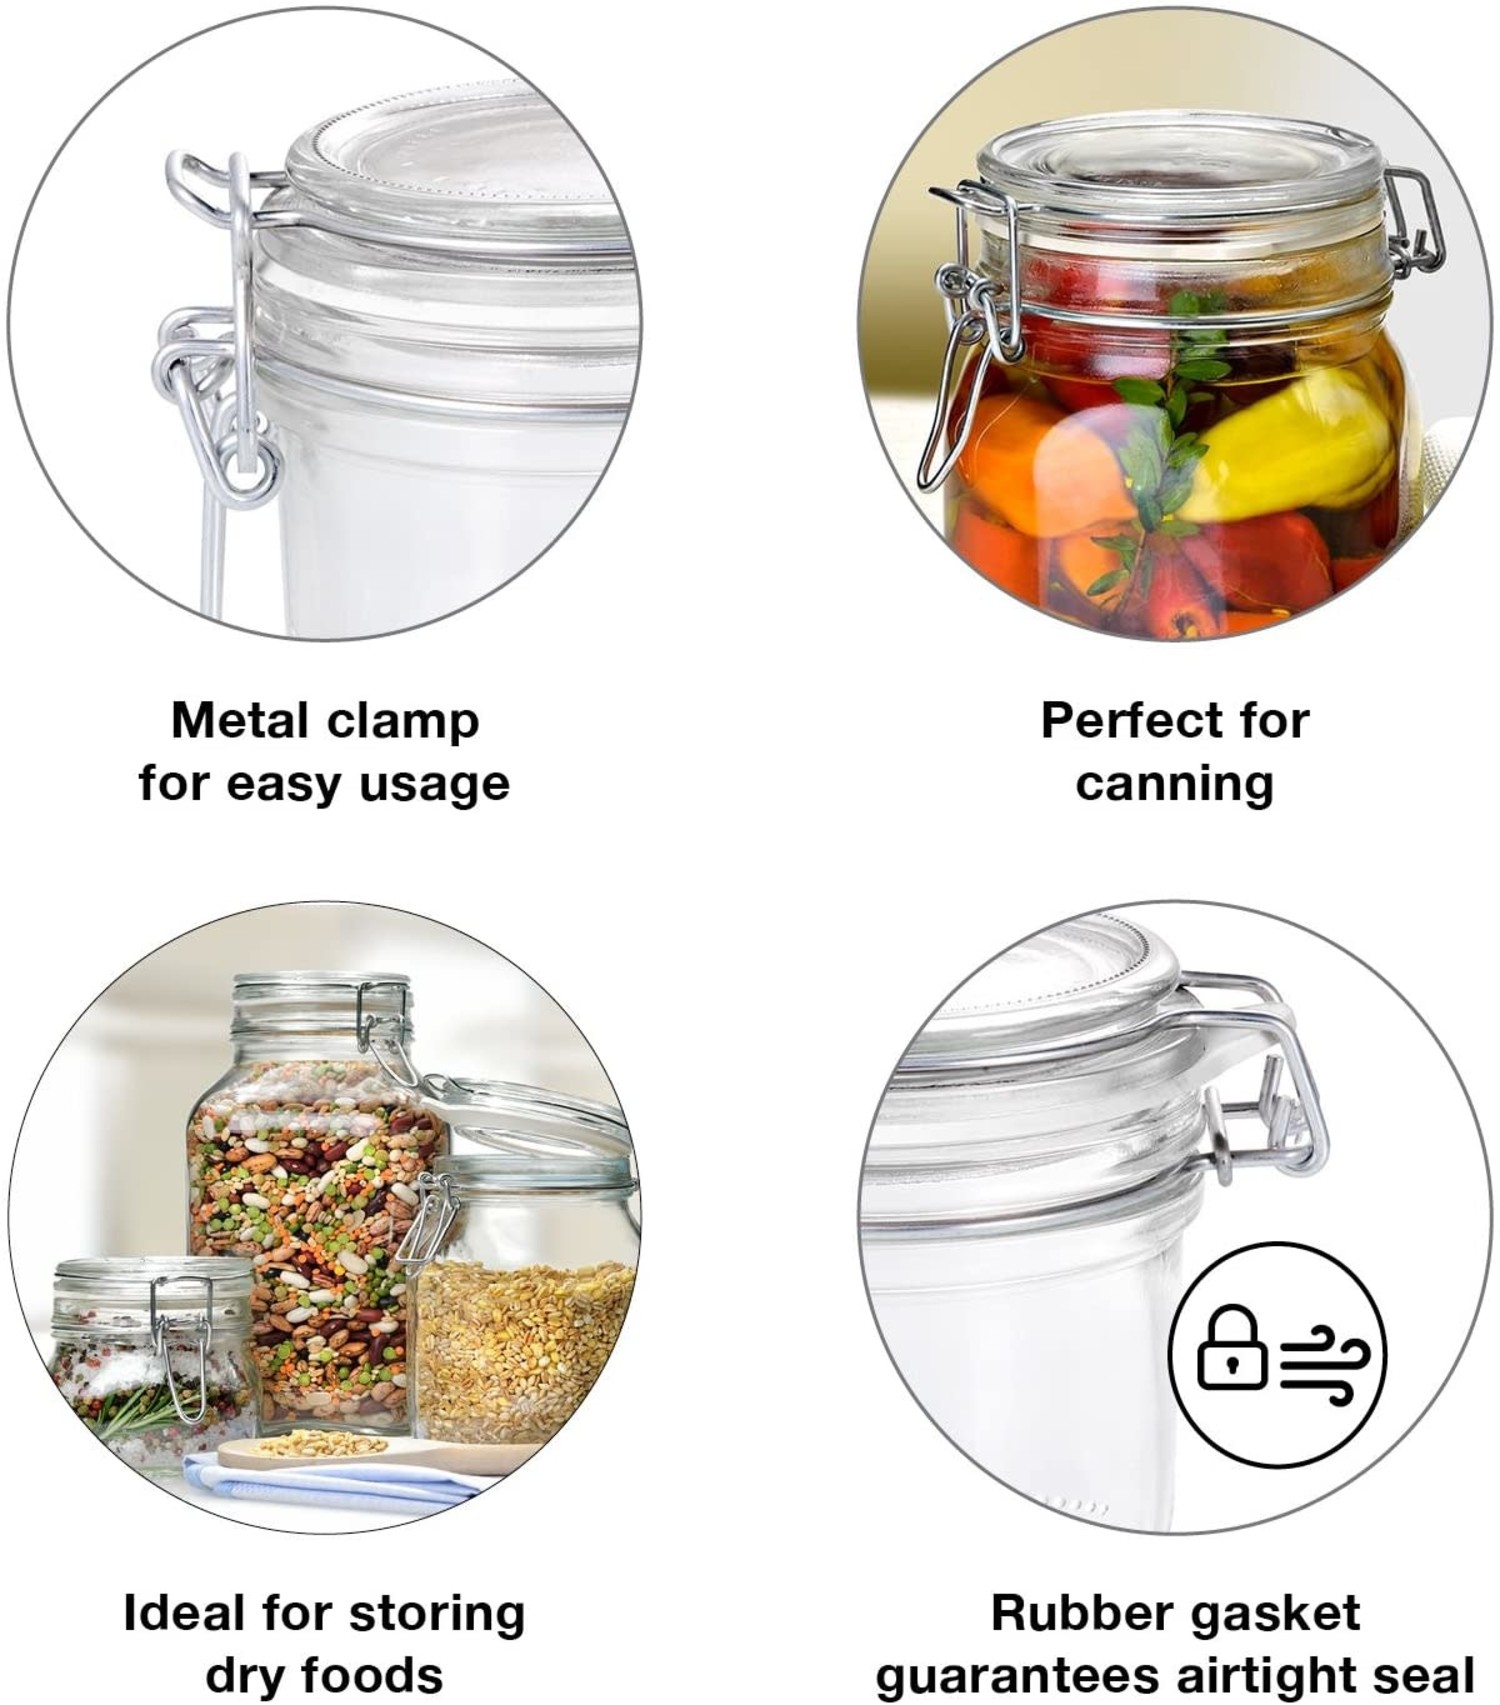 Fido 1-Liter Jar with Clamp Lid + Reviews